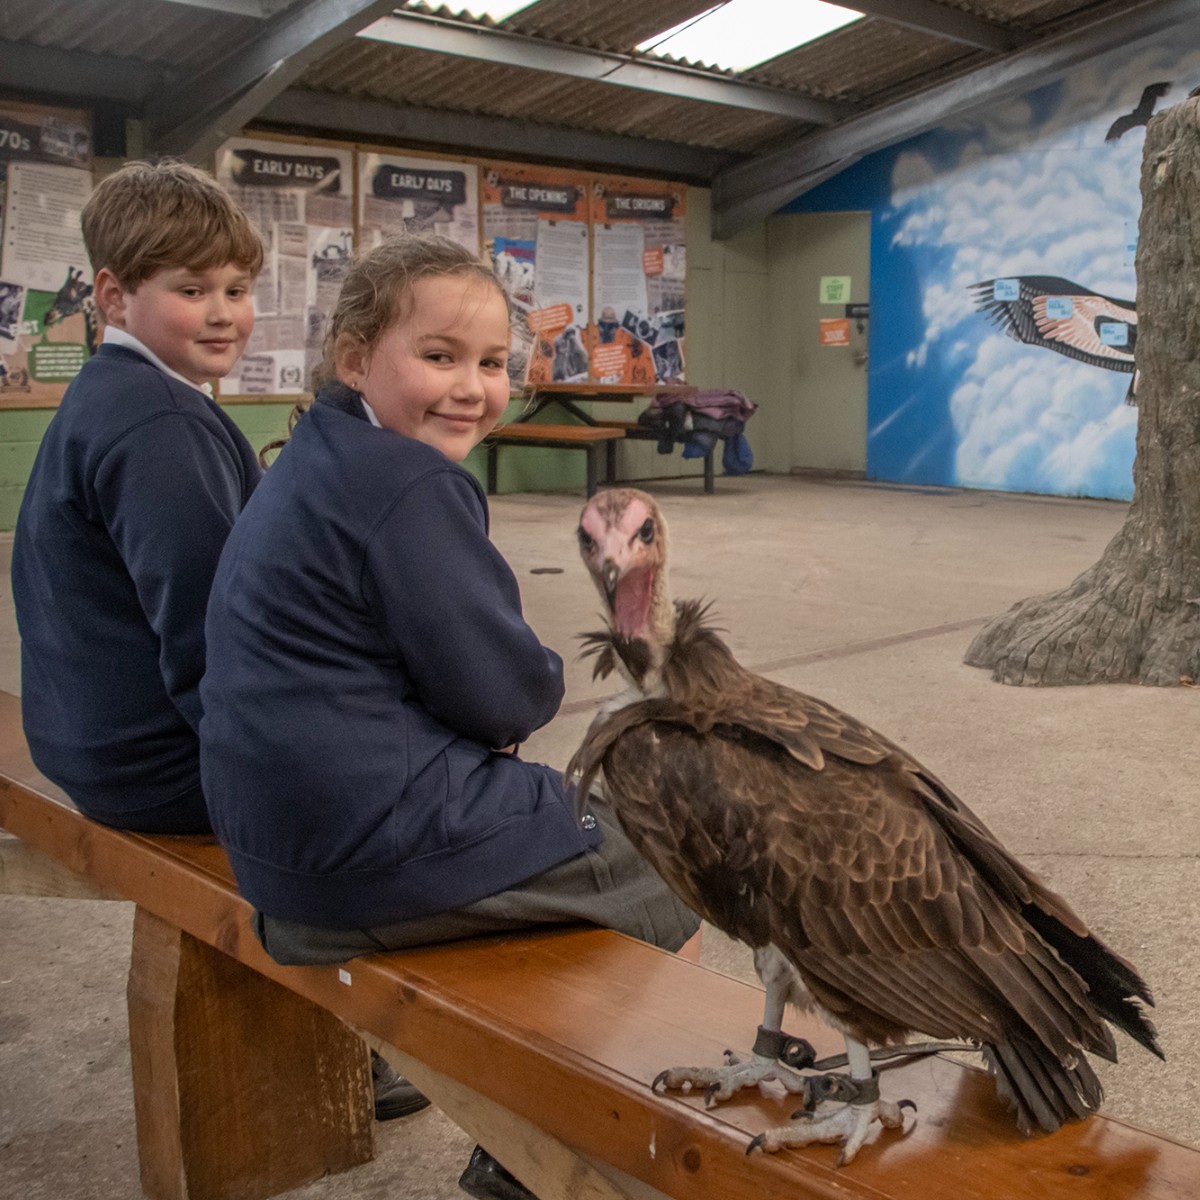 📣🌟🪶 Teachers - get ready for the Flight of Africa! This programme is all about vultures and conservation efforts out in Africa 💚 🚌 Elevate your school's next trip beyond spotting lions and giraffes and soar into the fascinating world of vultures: brnw.ch/21wIUNG